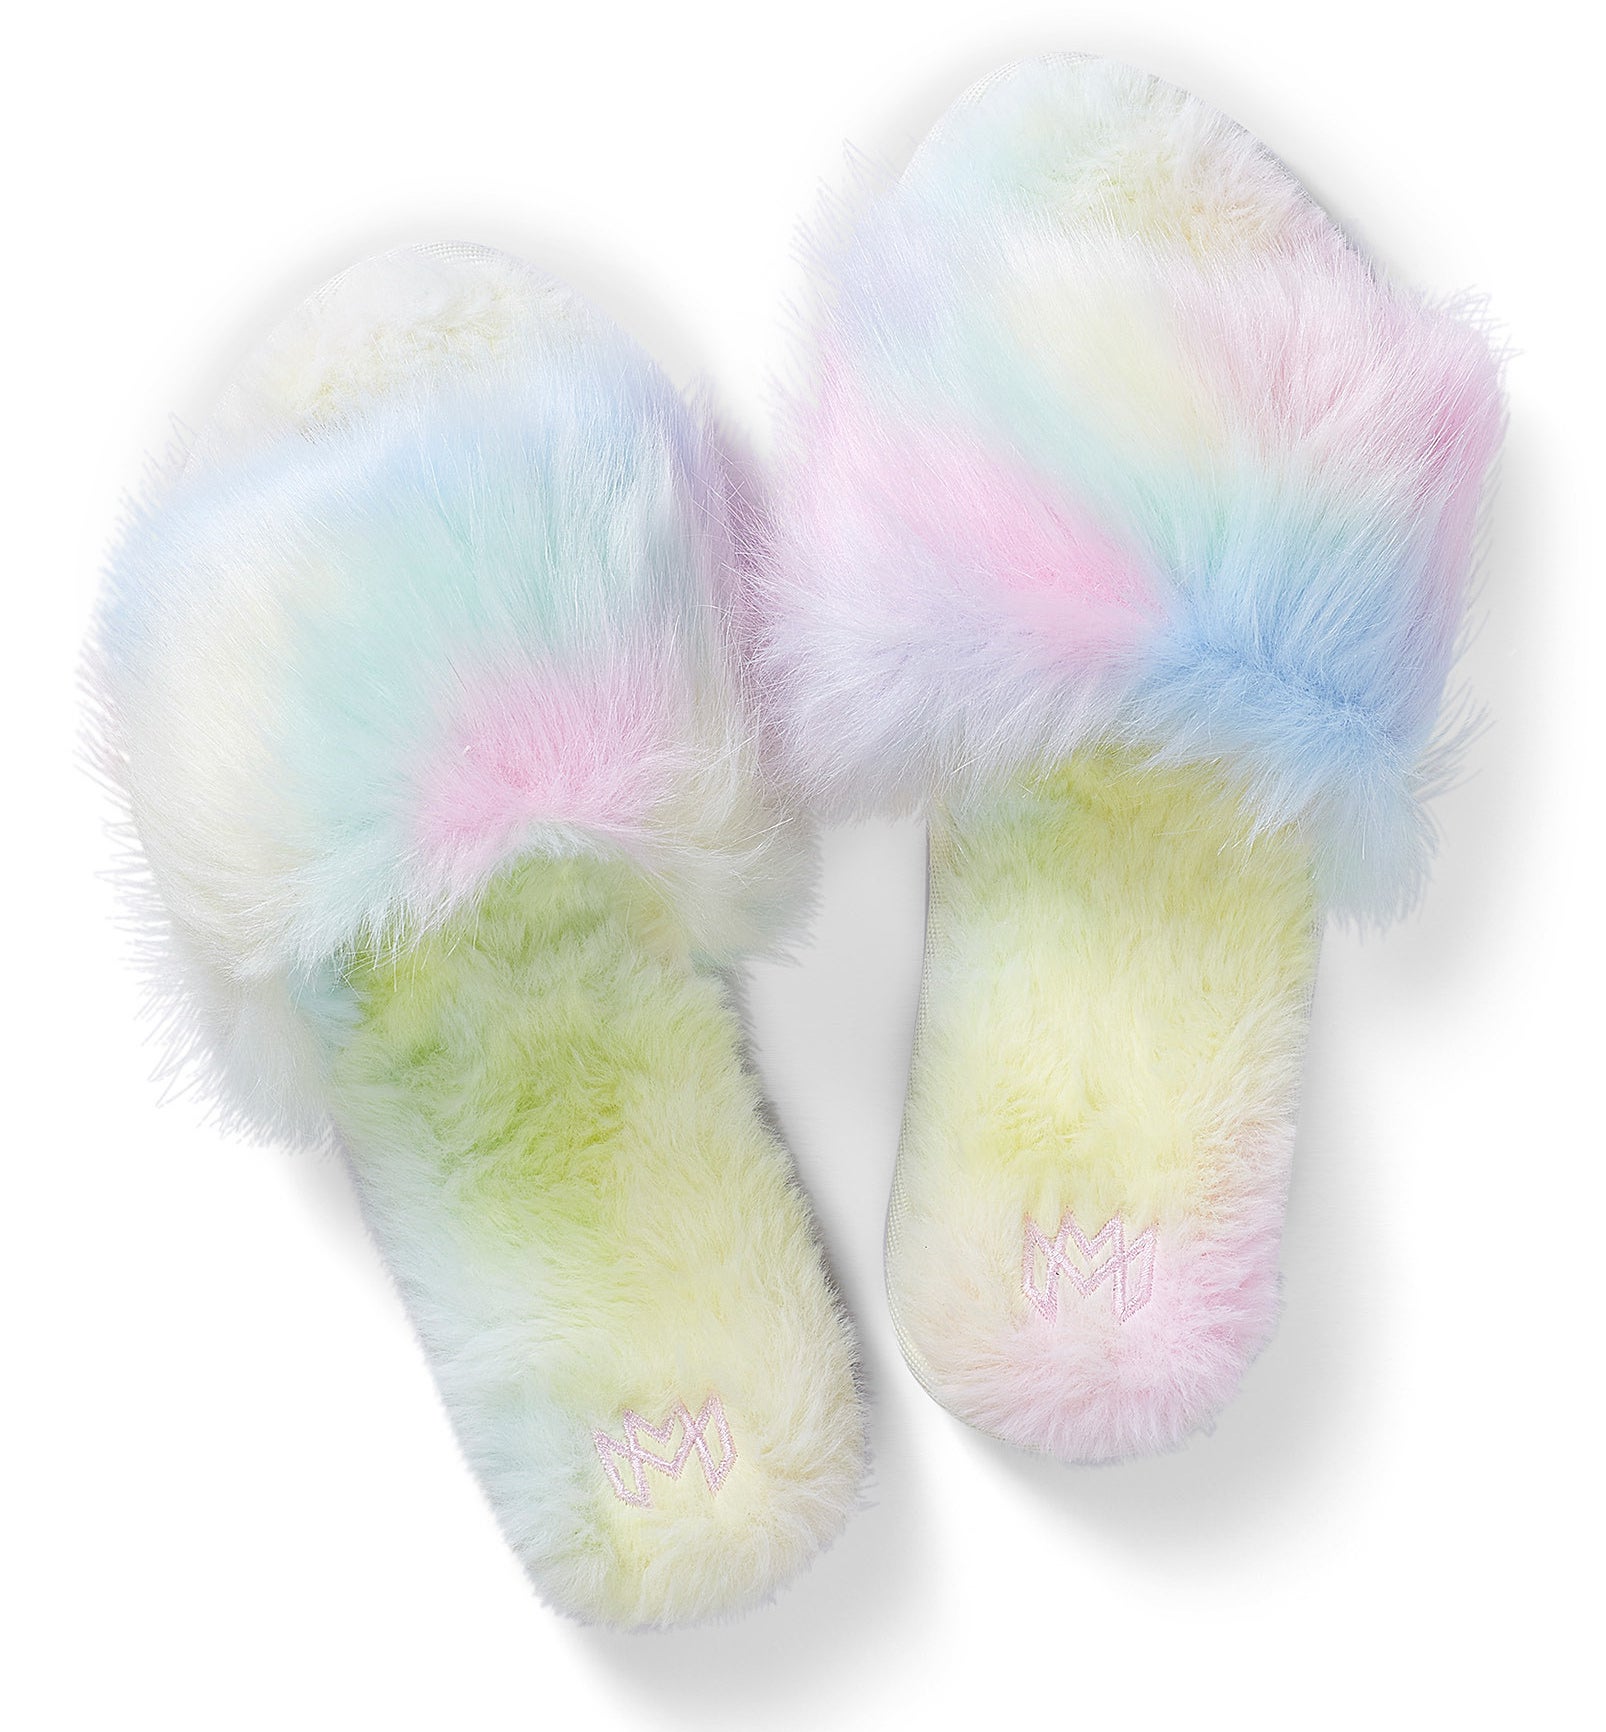 The slippers in all their fluffy glory